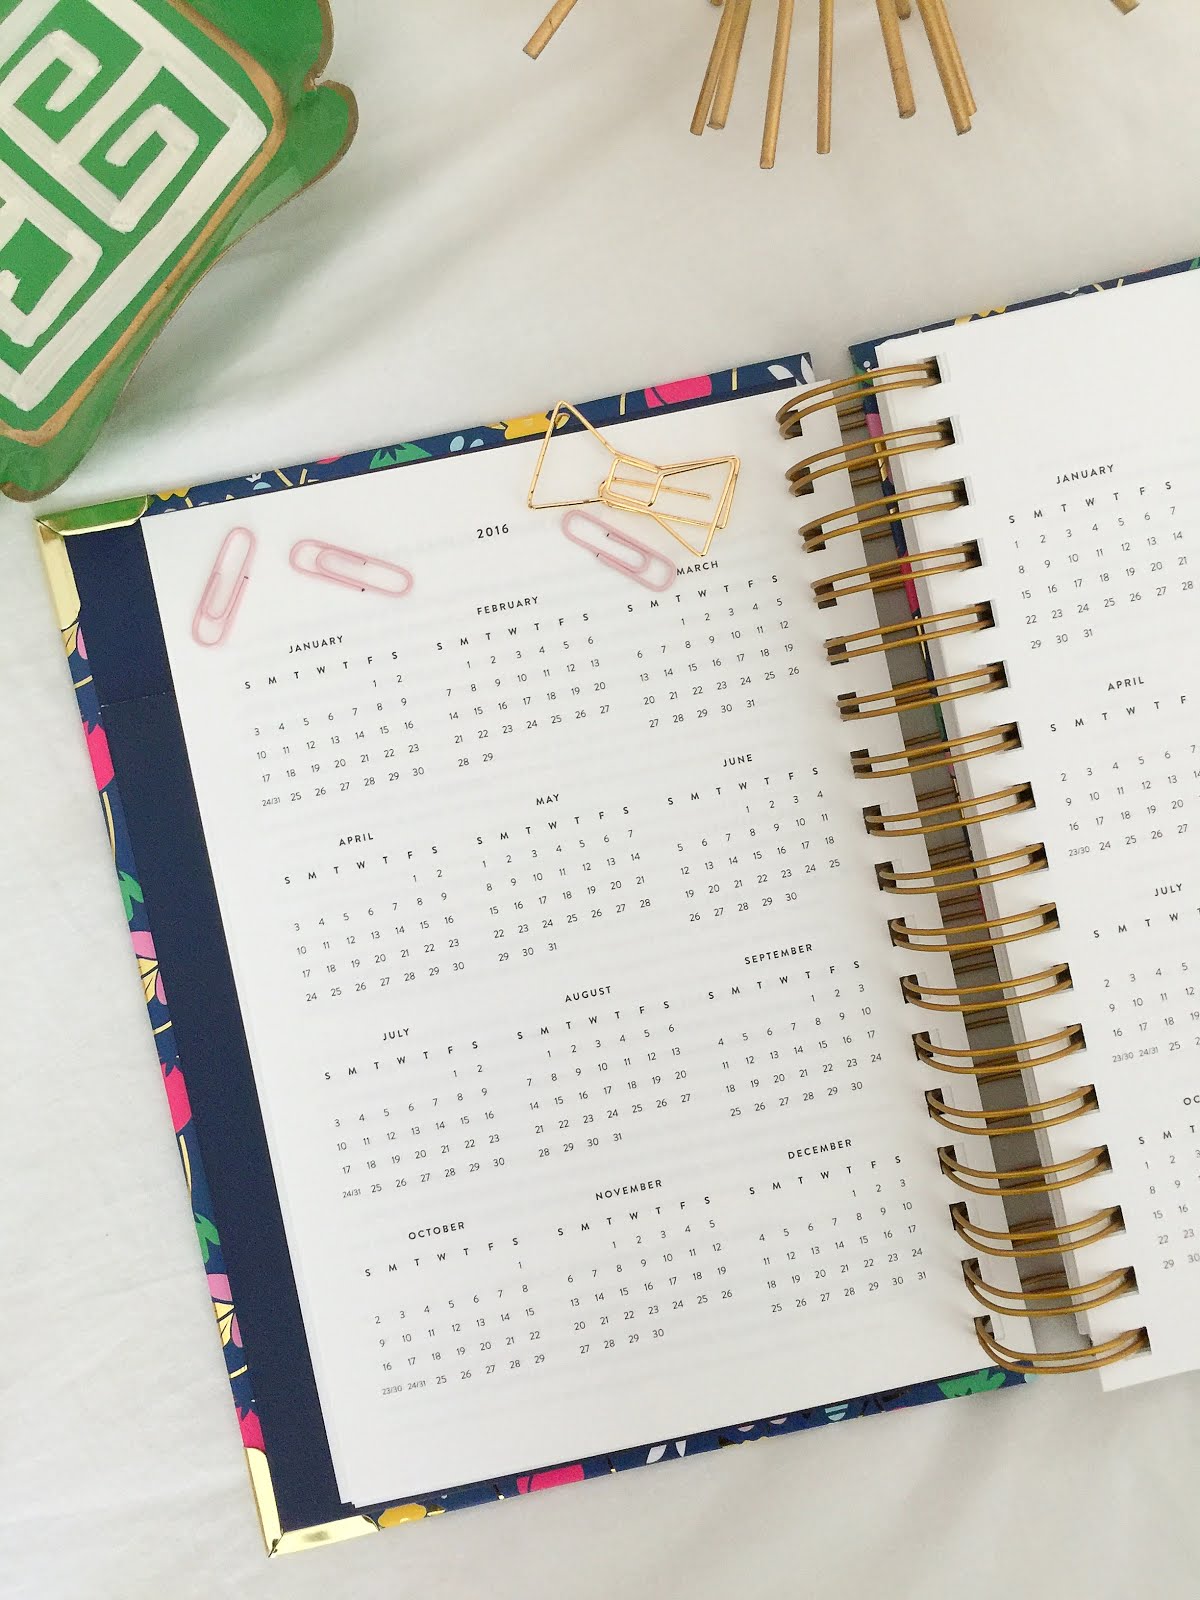 The Simplified Planner by Emily Ley